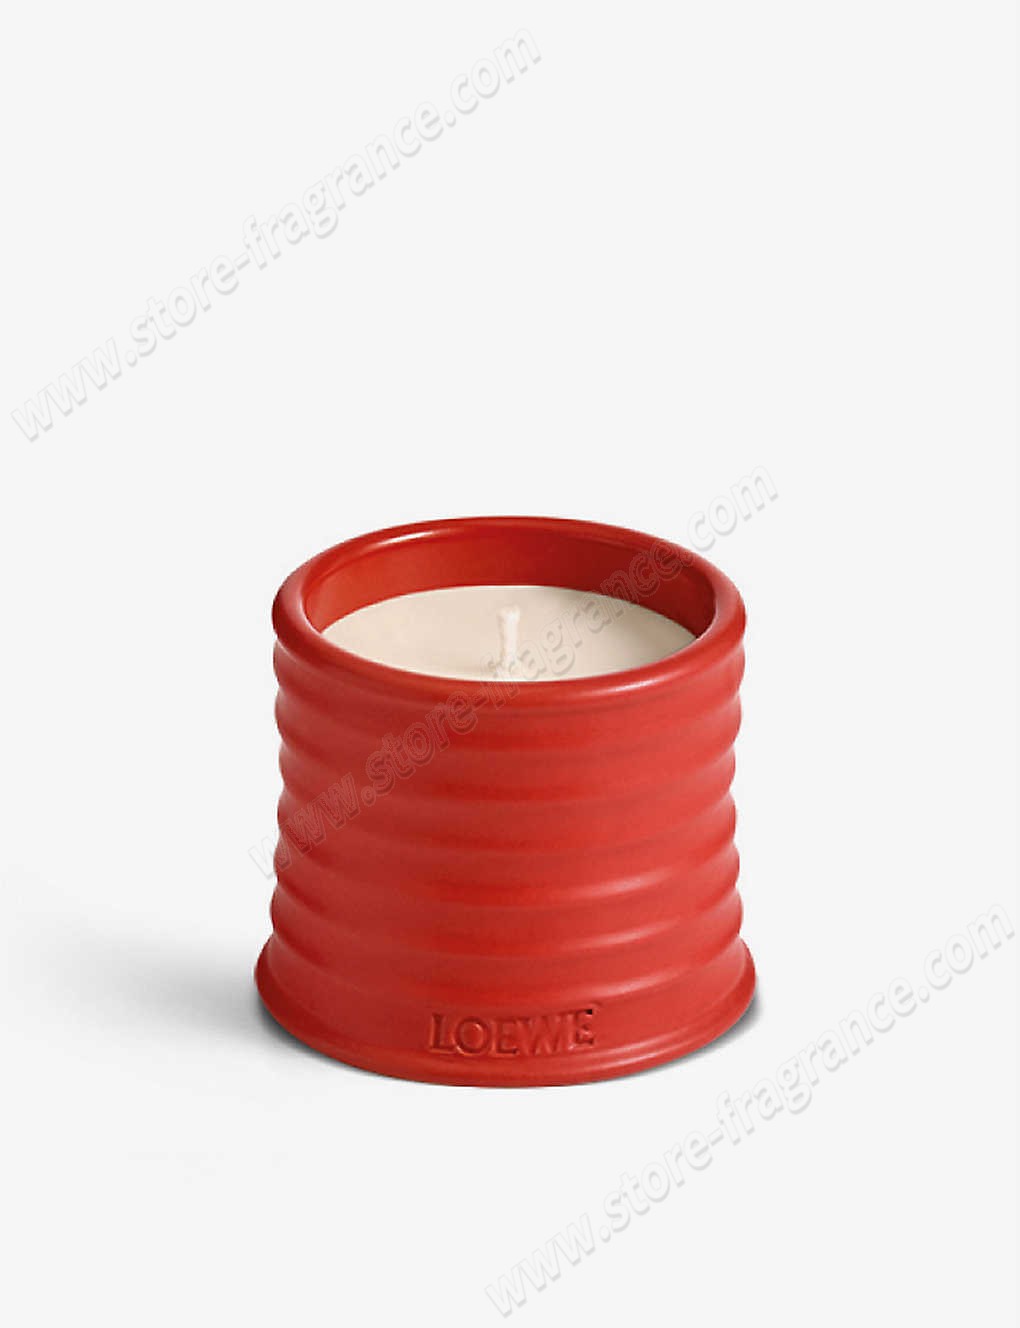 LOEWE/Tomato Leaves scented candle 170g ✿ Discount Store - -0